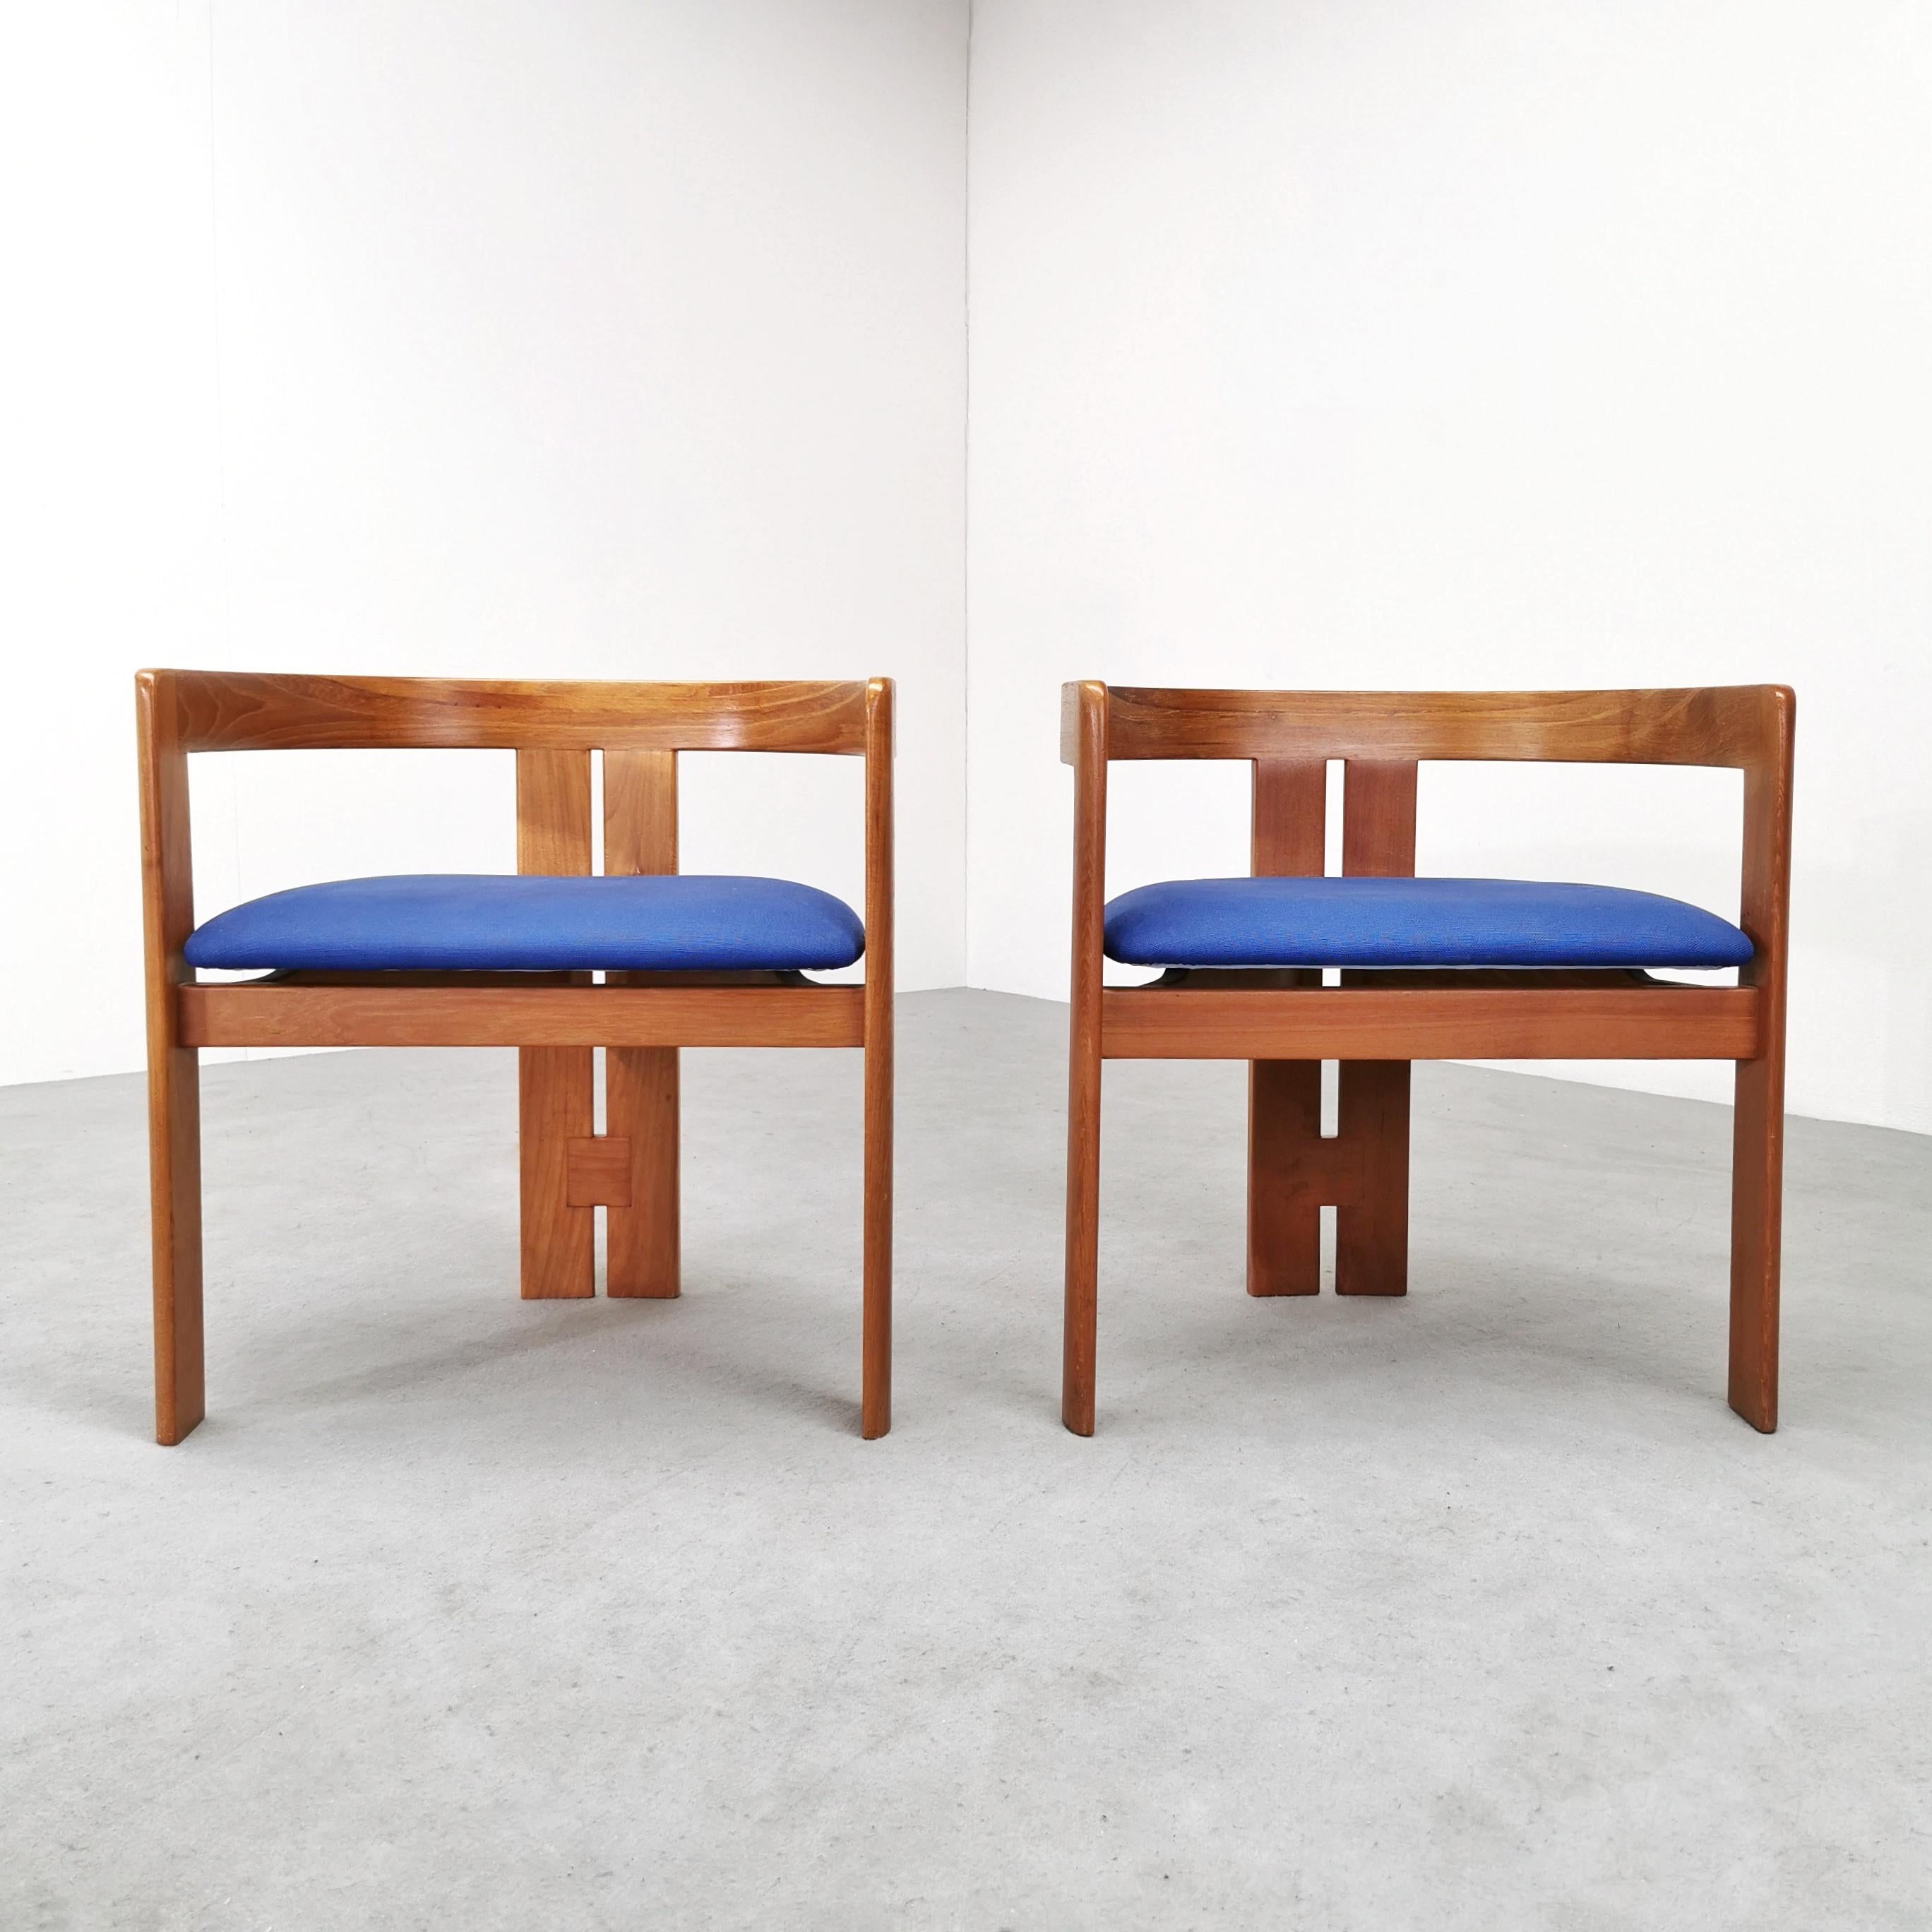 Pair of armchair chairs model Pigreco designed in the 1960s by Tobia Scarpa for Gavina. Light Wood frame and light blue fabric seat. The armchairs are presented in excellent condition.